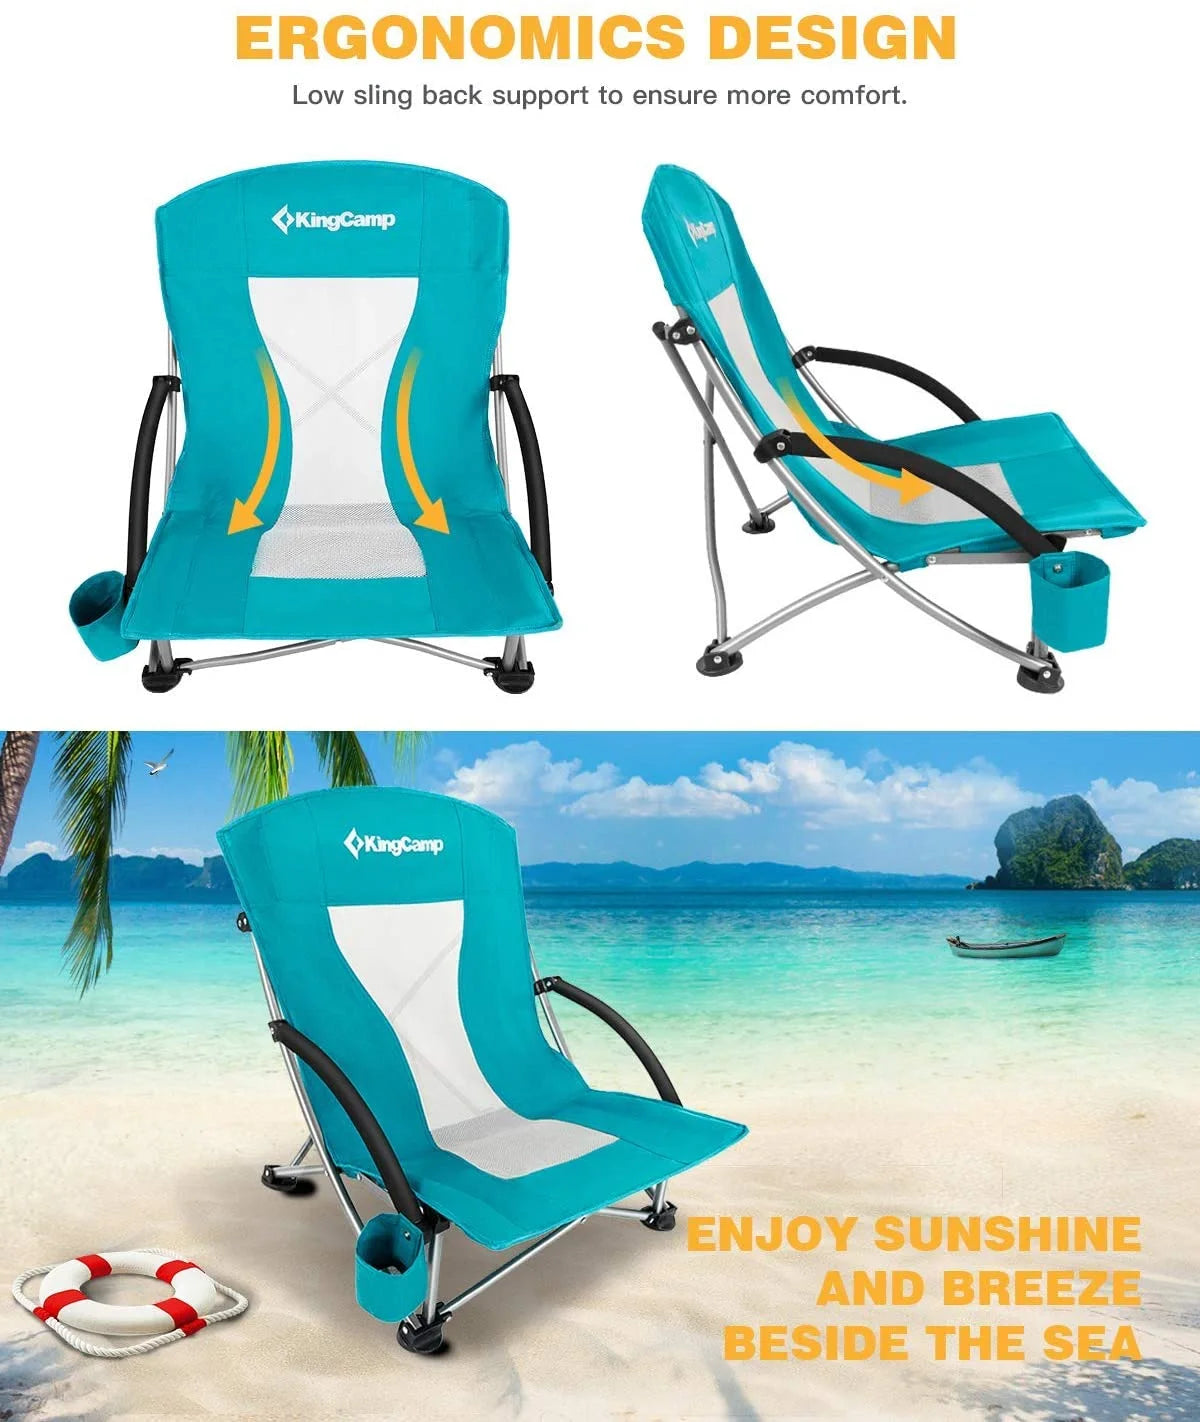 Folding Low Back Backpack Beach Camping Chairs with Headrest - 2 Piece